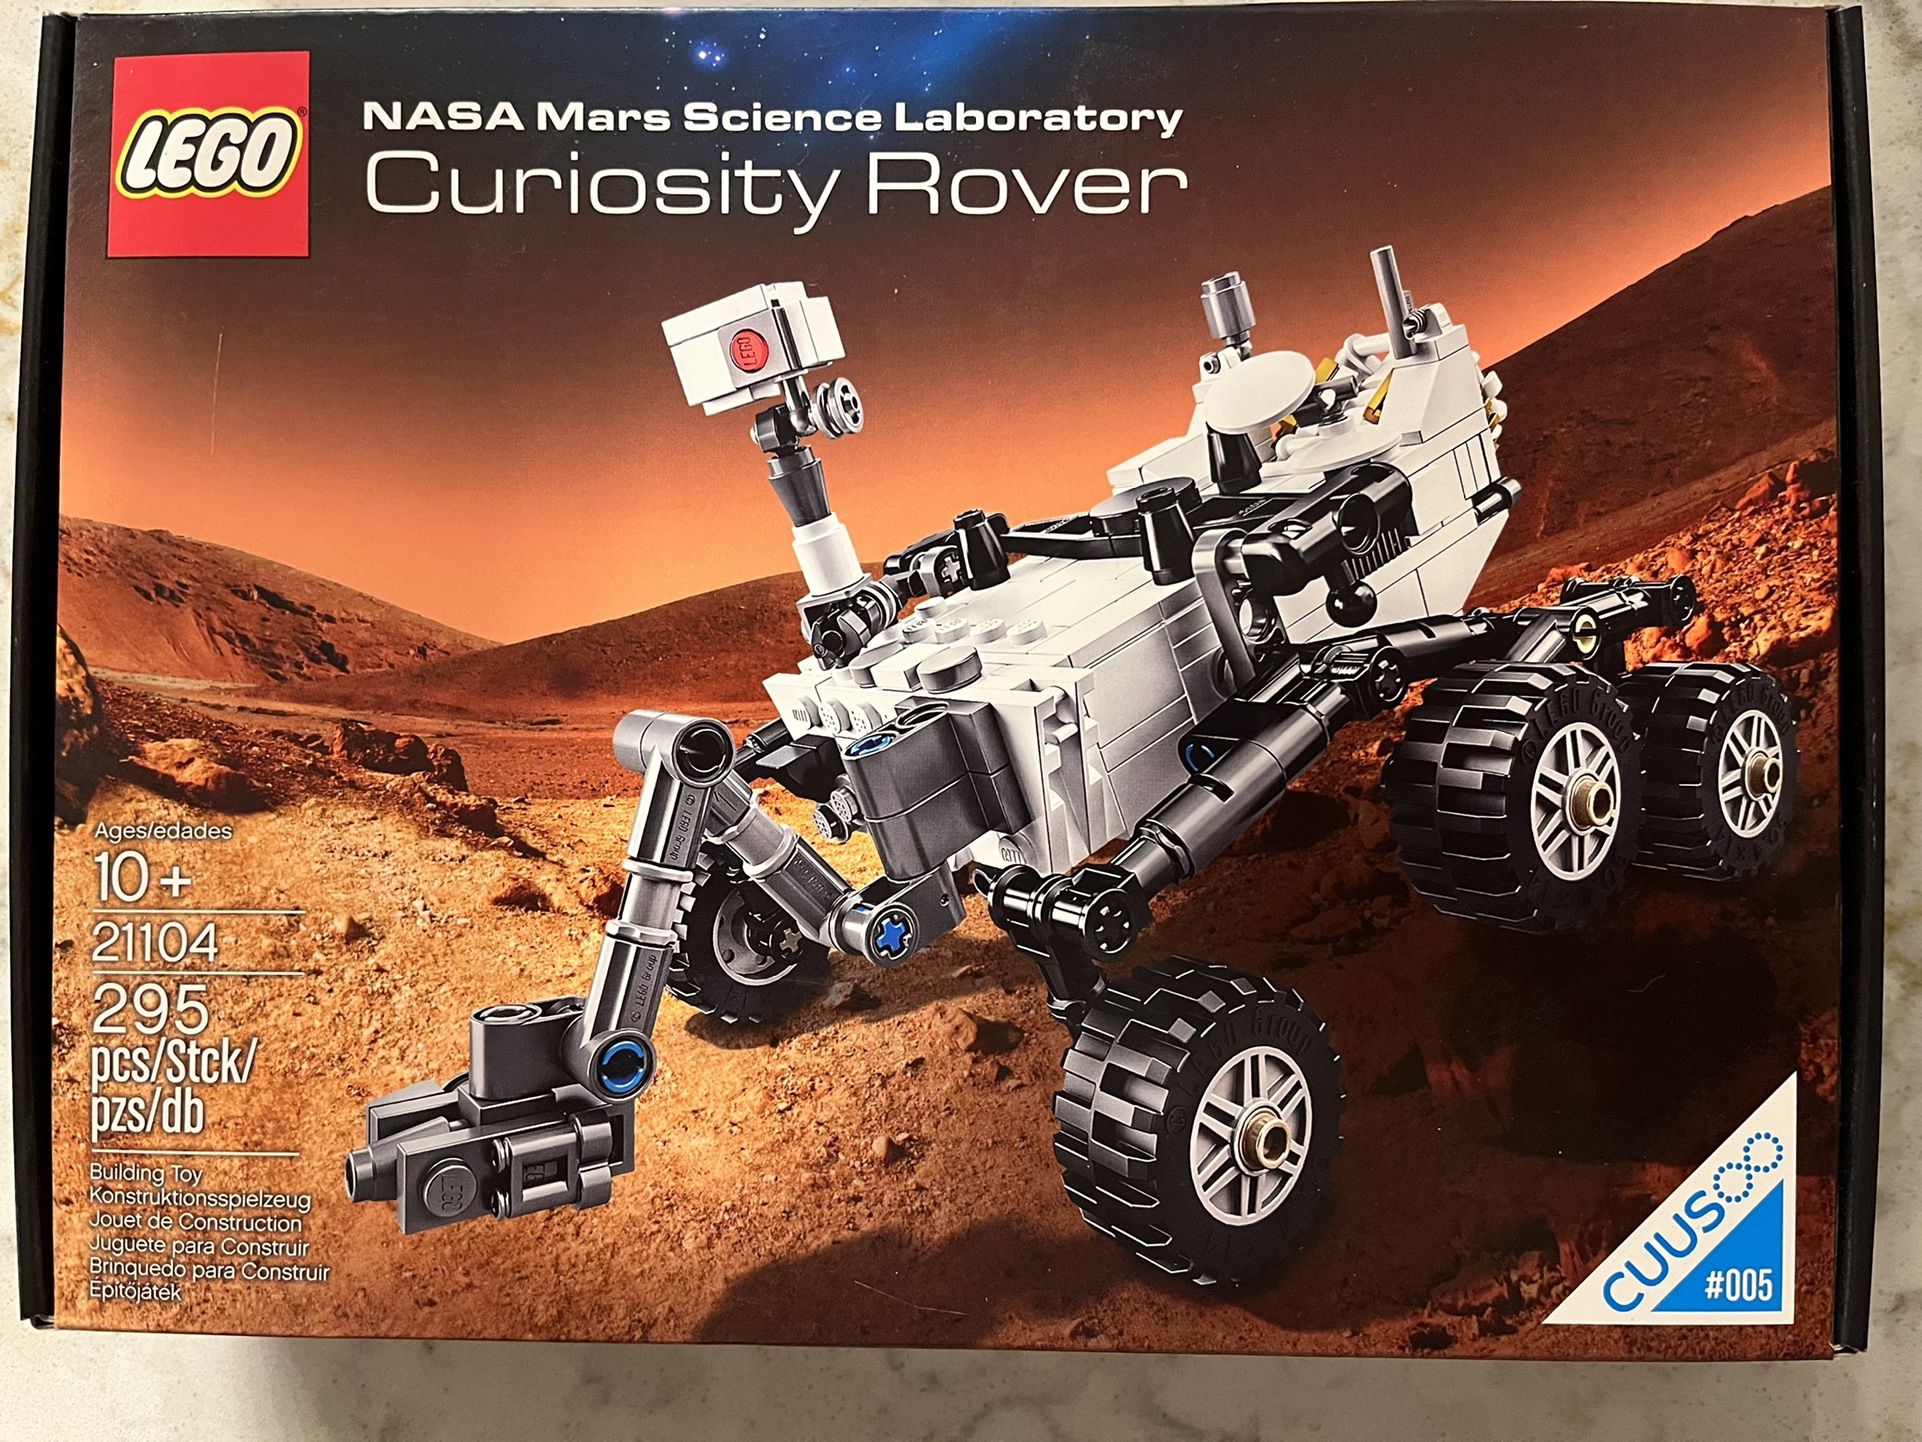 Lego 21104 Curiosity Rover for in West - OfferUp